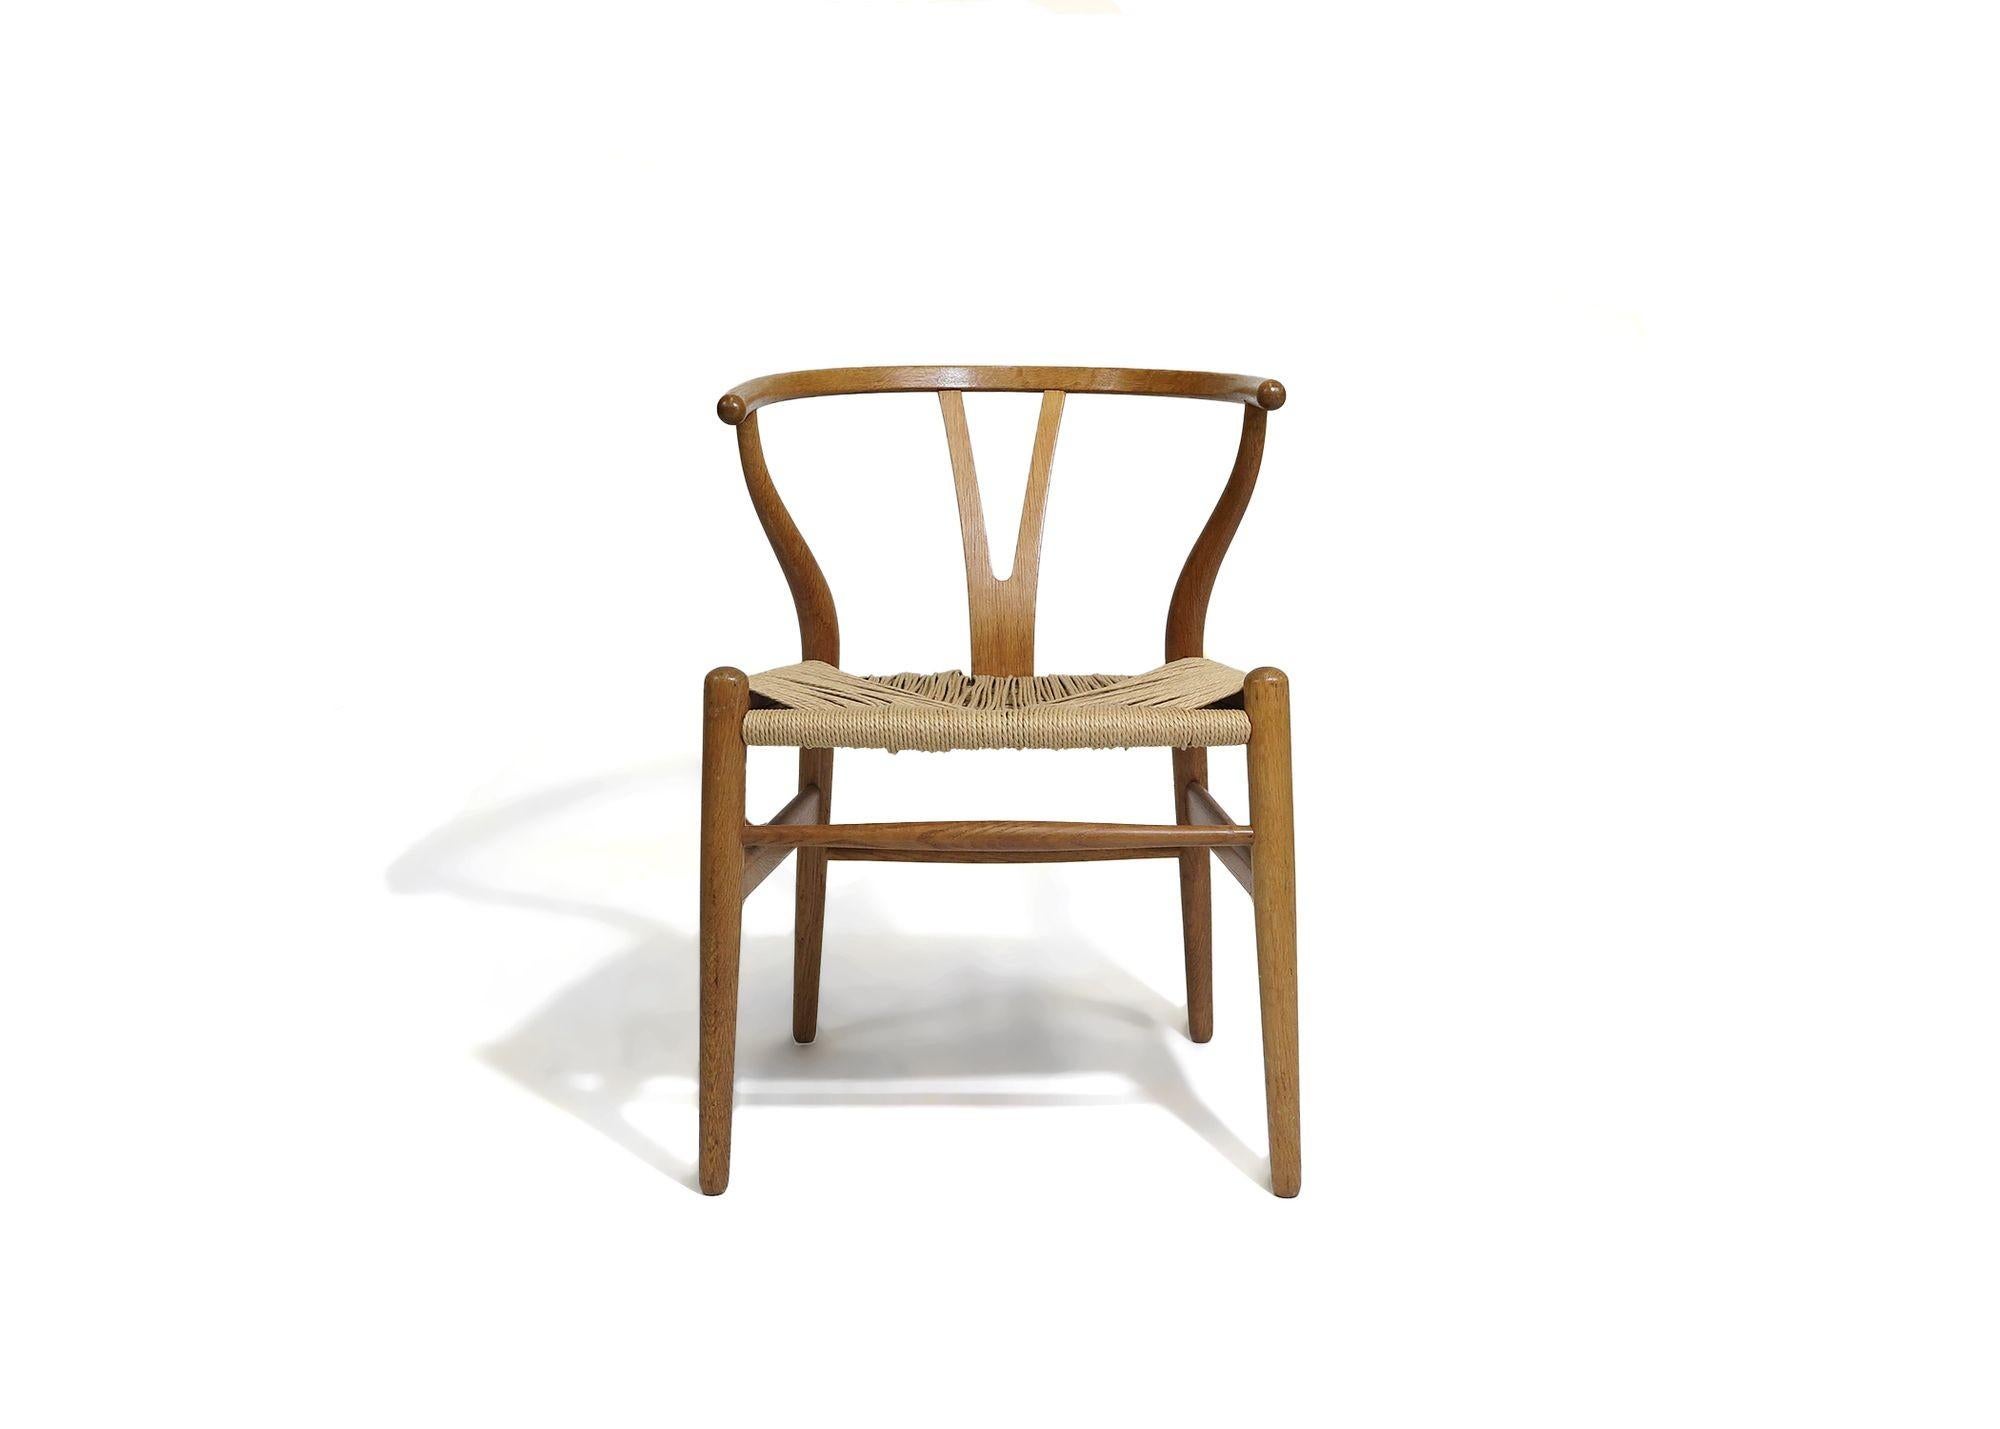 Pair of authentic Hans Wegner for Carl Hansen CH24 wishbone dining chairs in white oak with paper-cord seats. Stamped.
Measurements W 20.50'' x D 20.25'' x H 28.75''
Seat Height 16.75''.